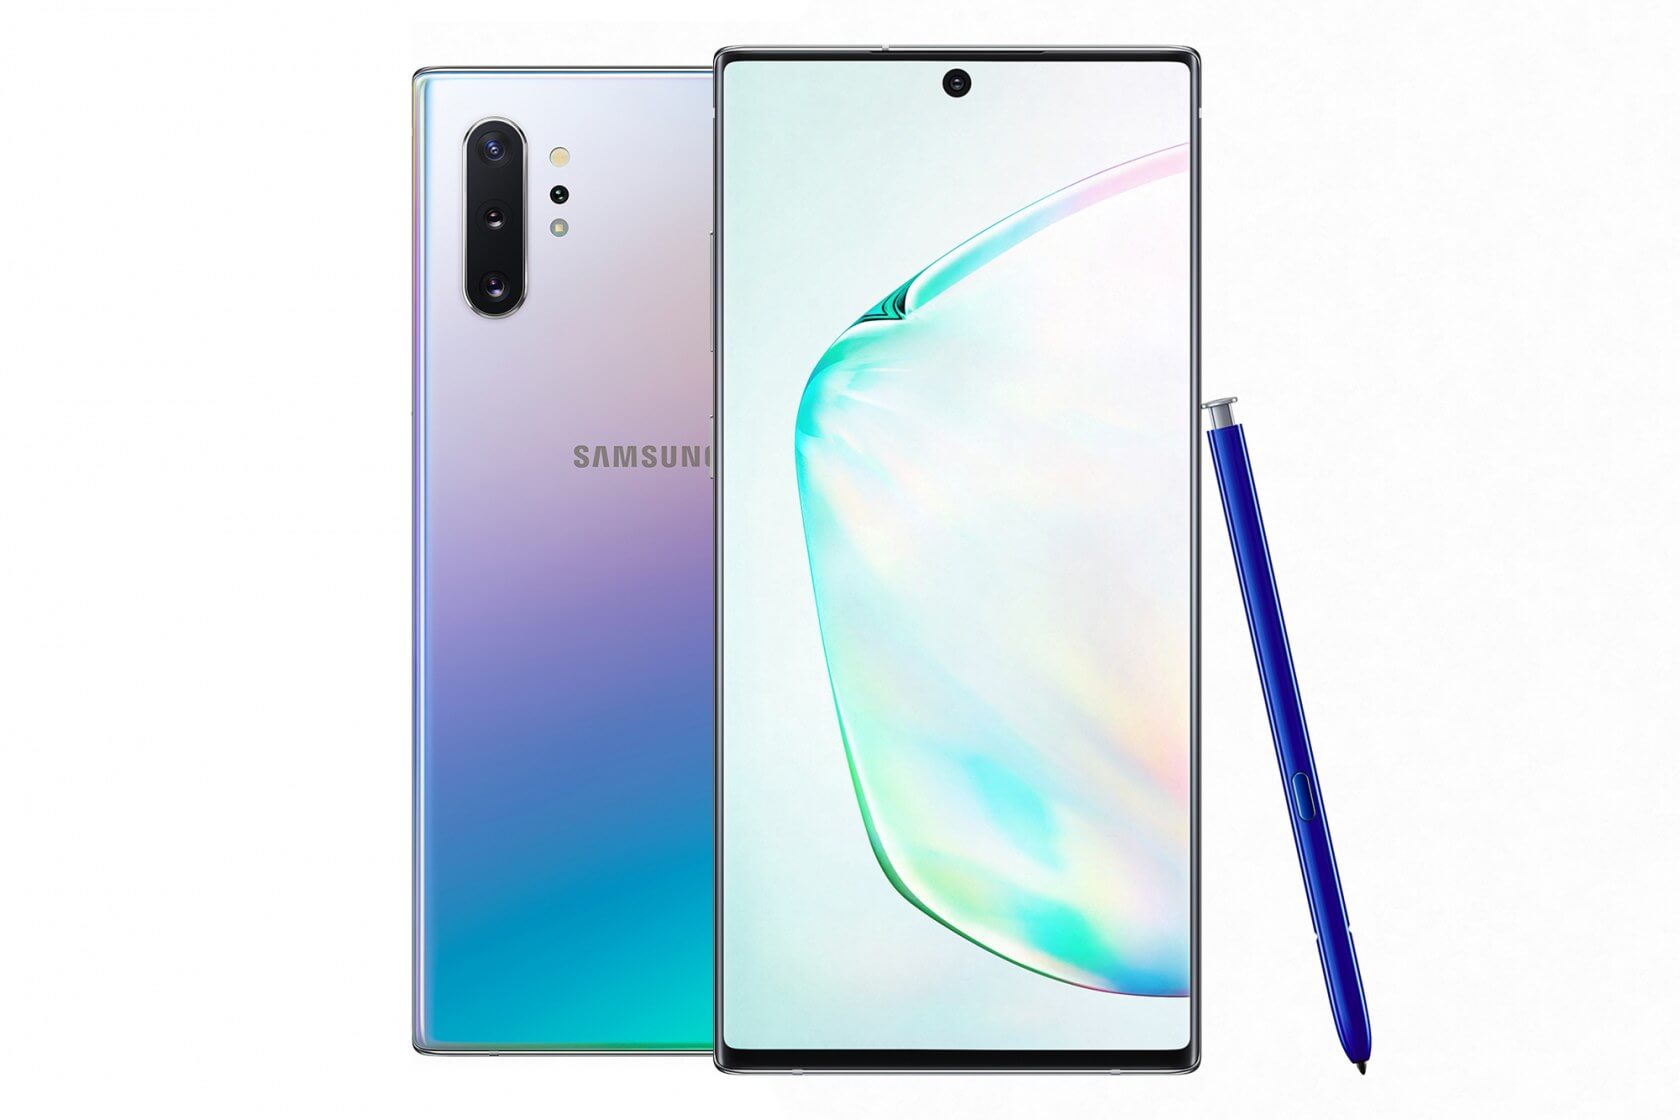 Rumor: Samsung could merge the Note and S-series into one new handset